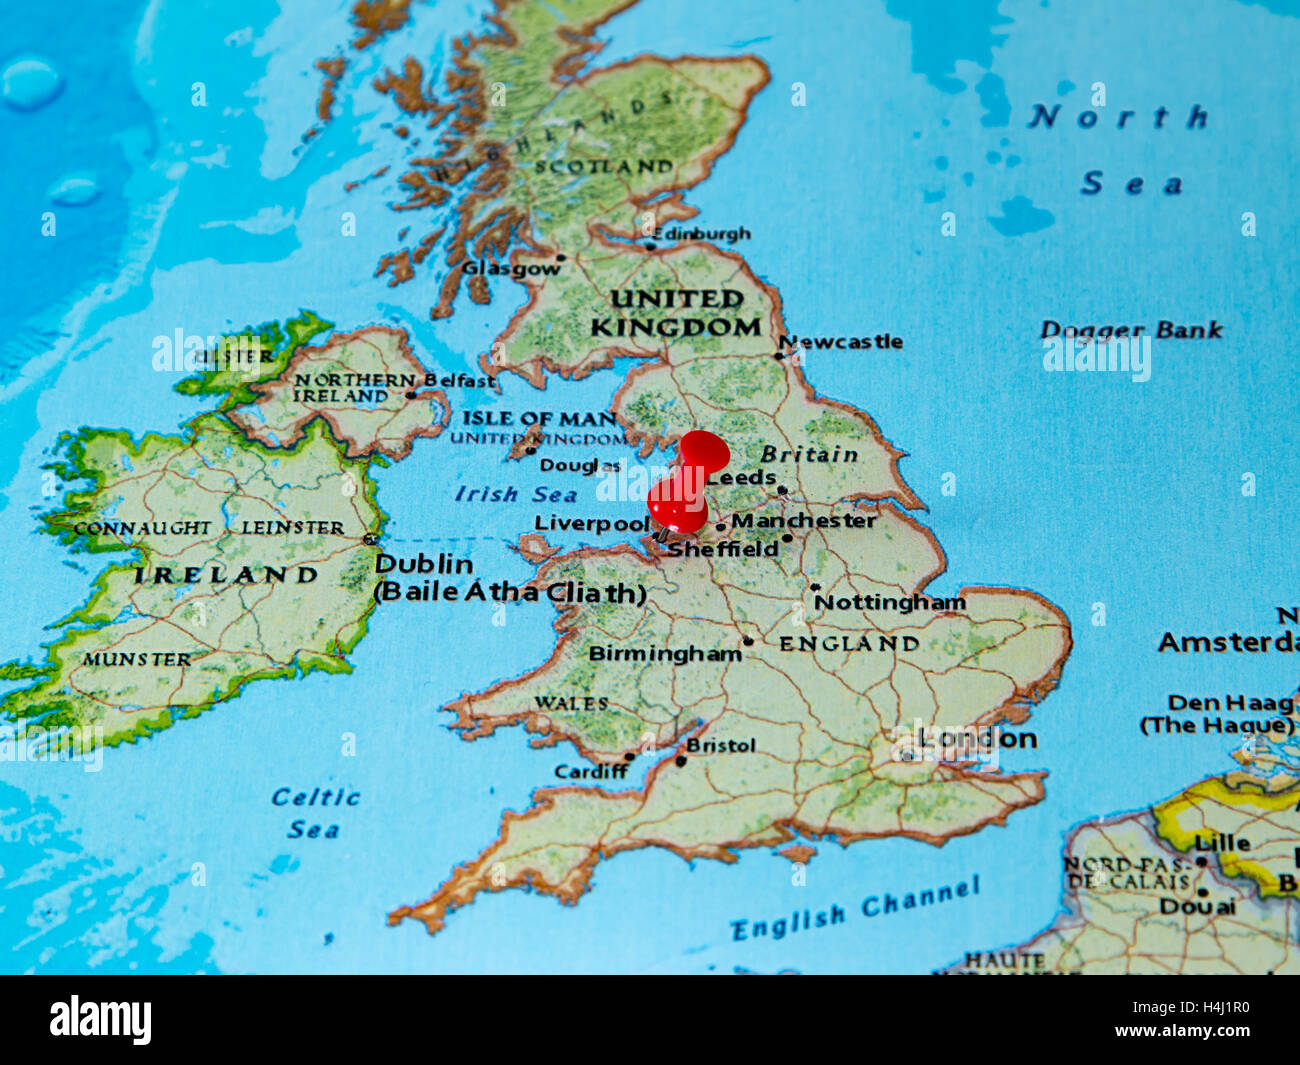 Liverpool, U.K. pinned on a map of Europe Stock Photo - Alamy